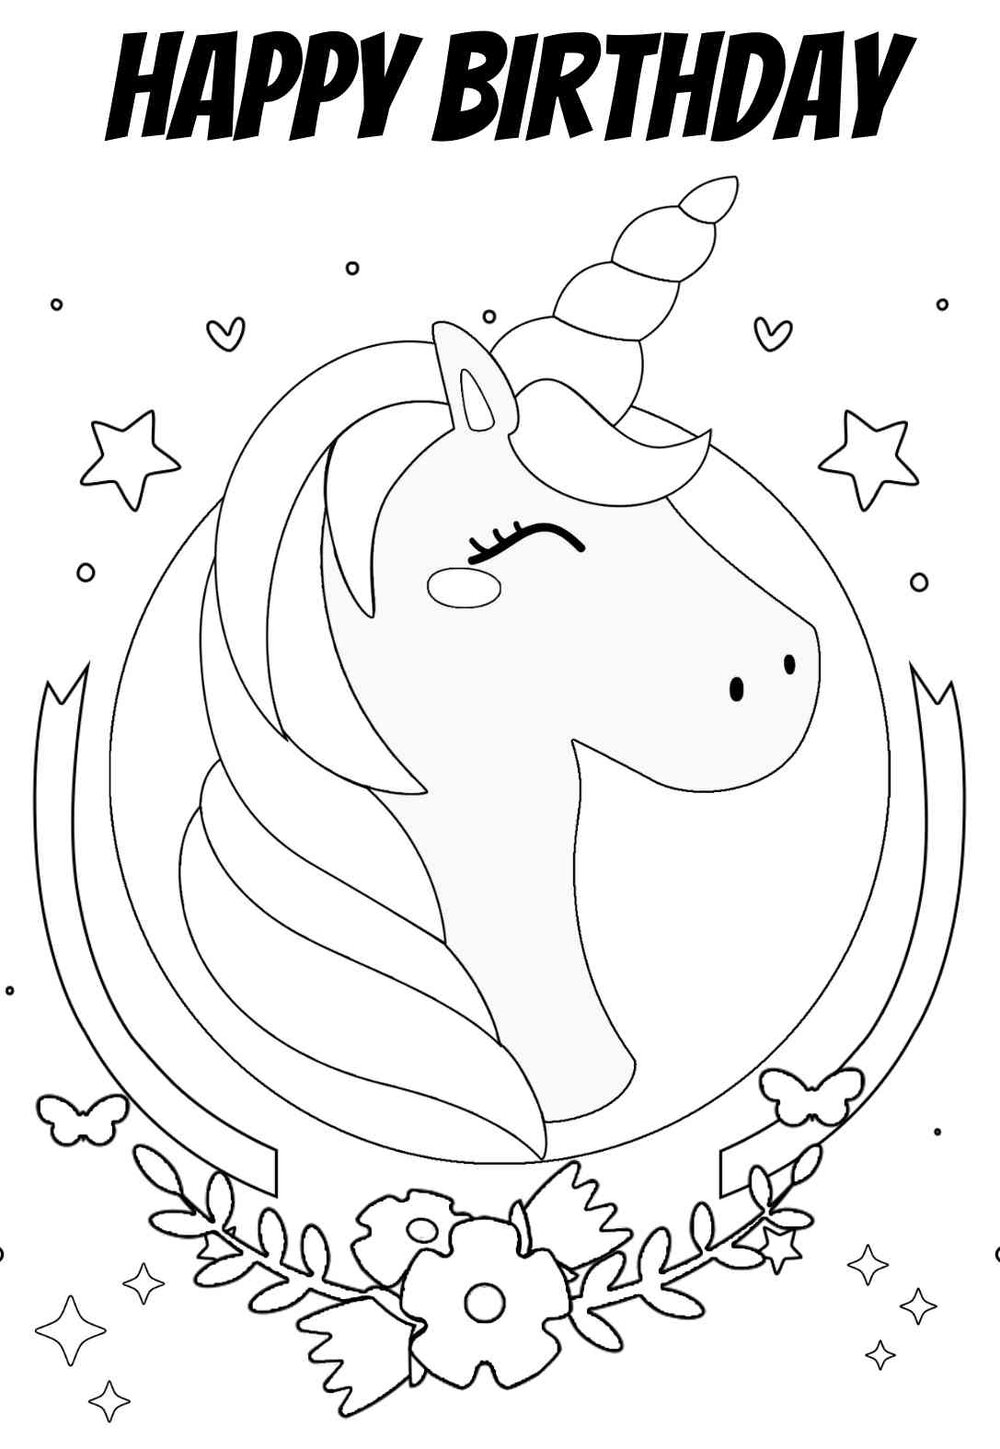 20 Unbelievable Unicorn Coloring Pages & Cards free ...